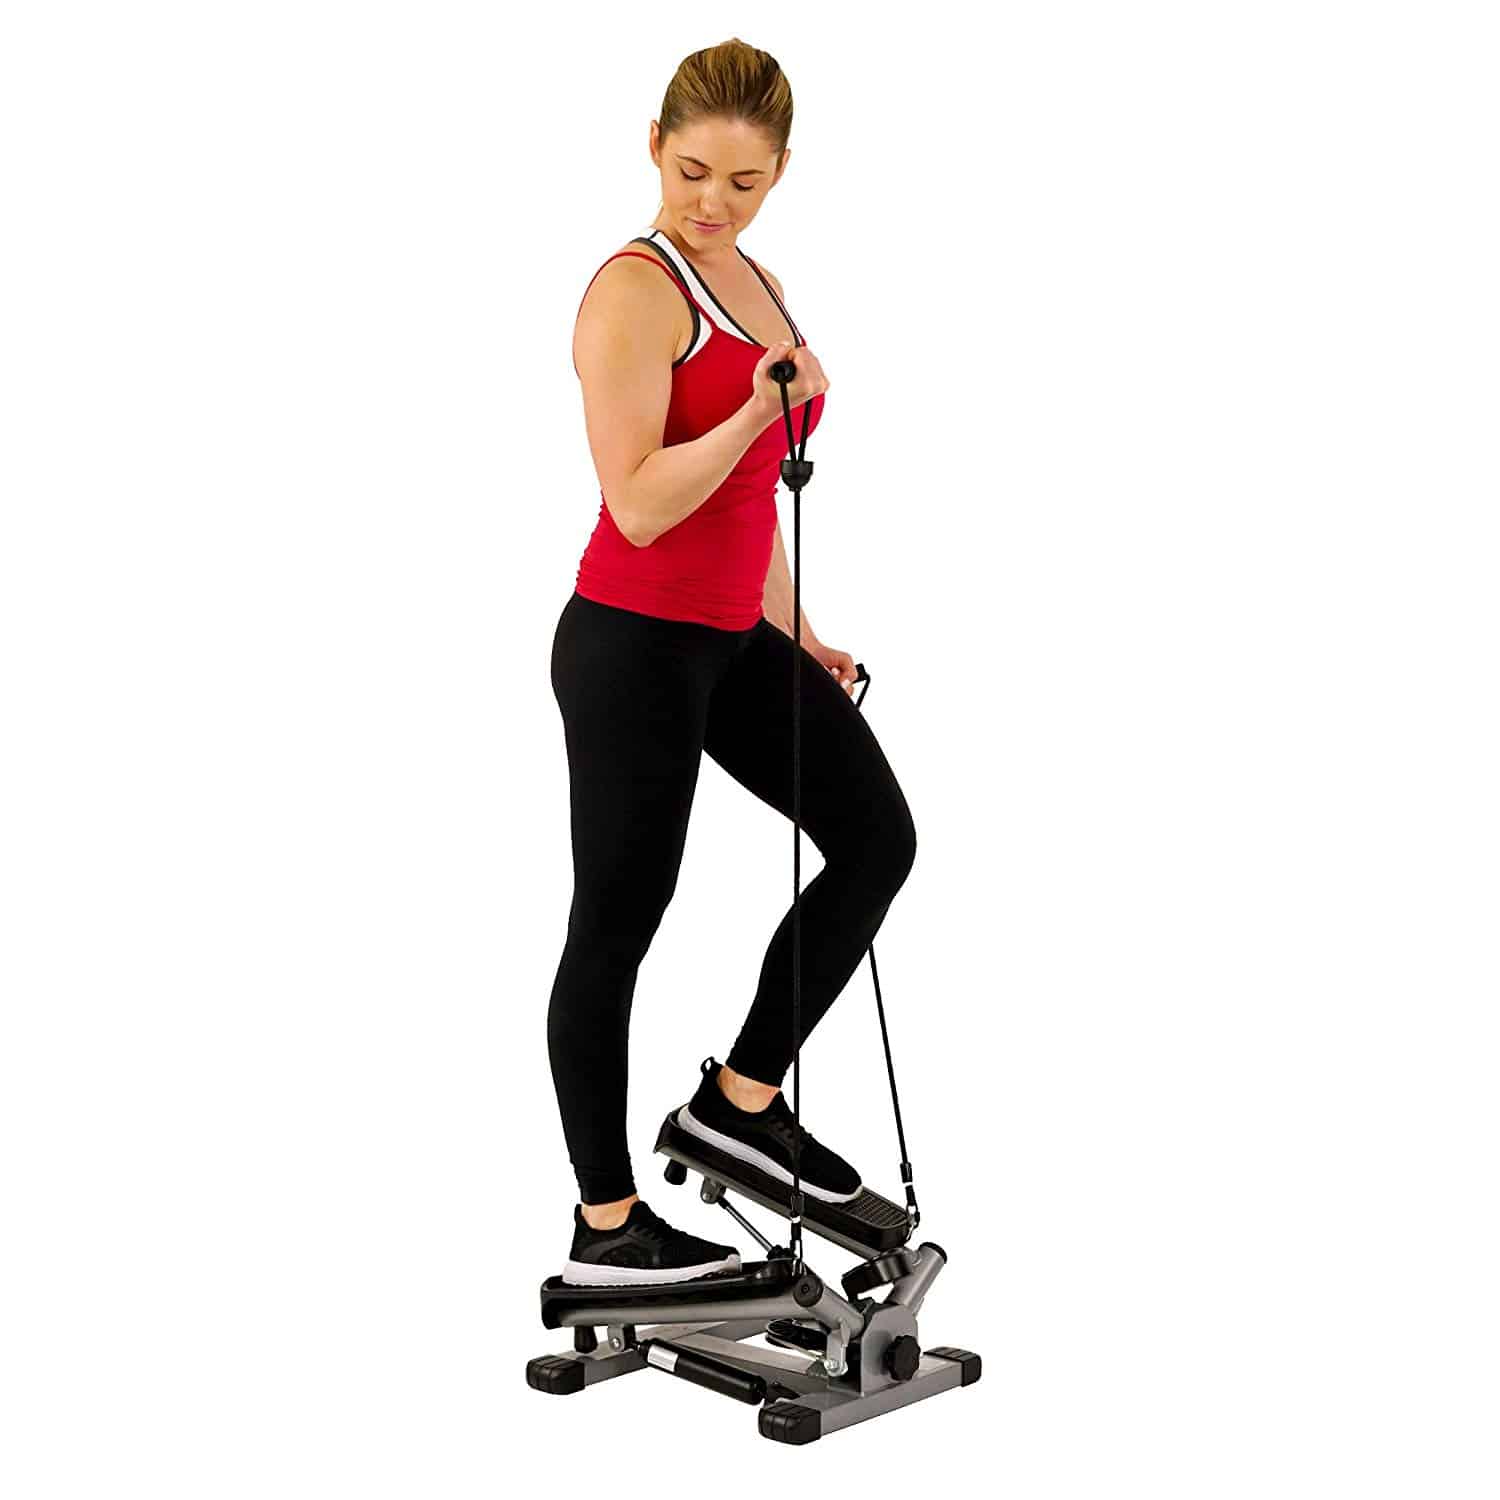 Top 10 Best Stair Stepper for Home in 2022 Complete Review